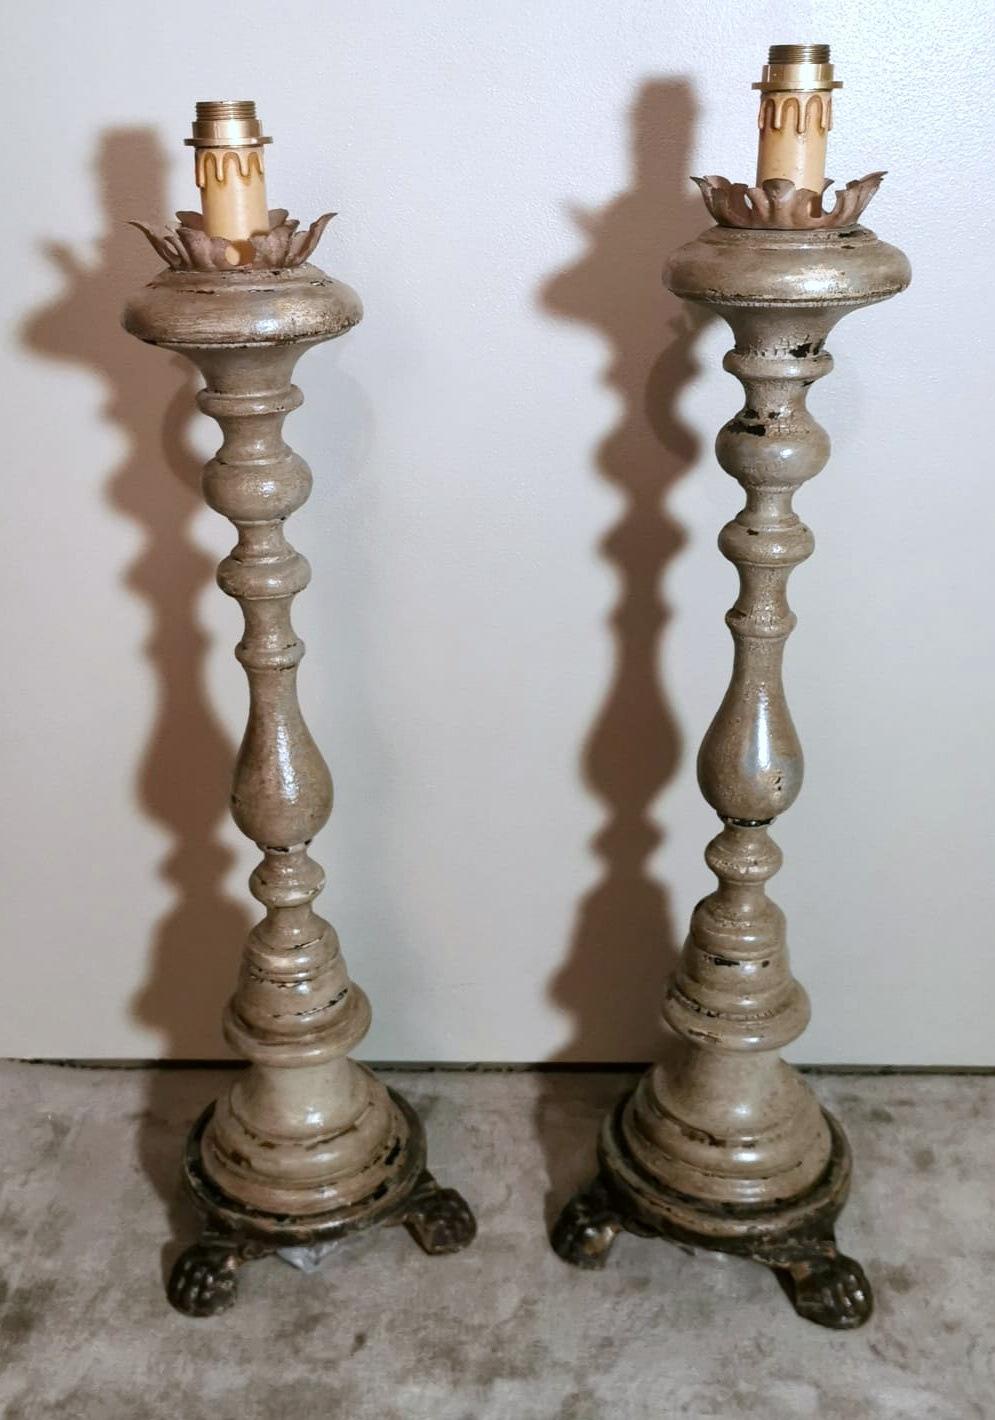 We kindly suggest that you read the entire description, as with it we try to give you detailed technical and historical information to ensure the authenticity of our objects.
Peculiar, rare, and antique pair of Italian altar candlesticks in the